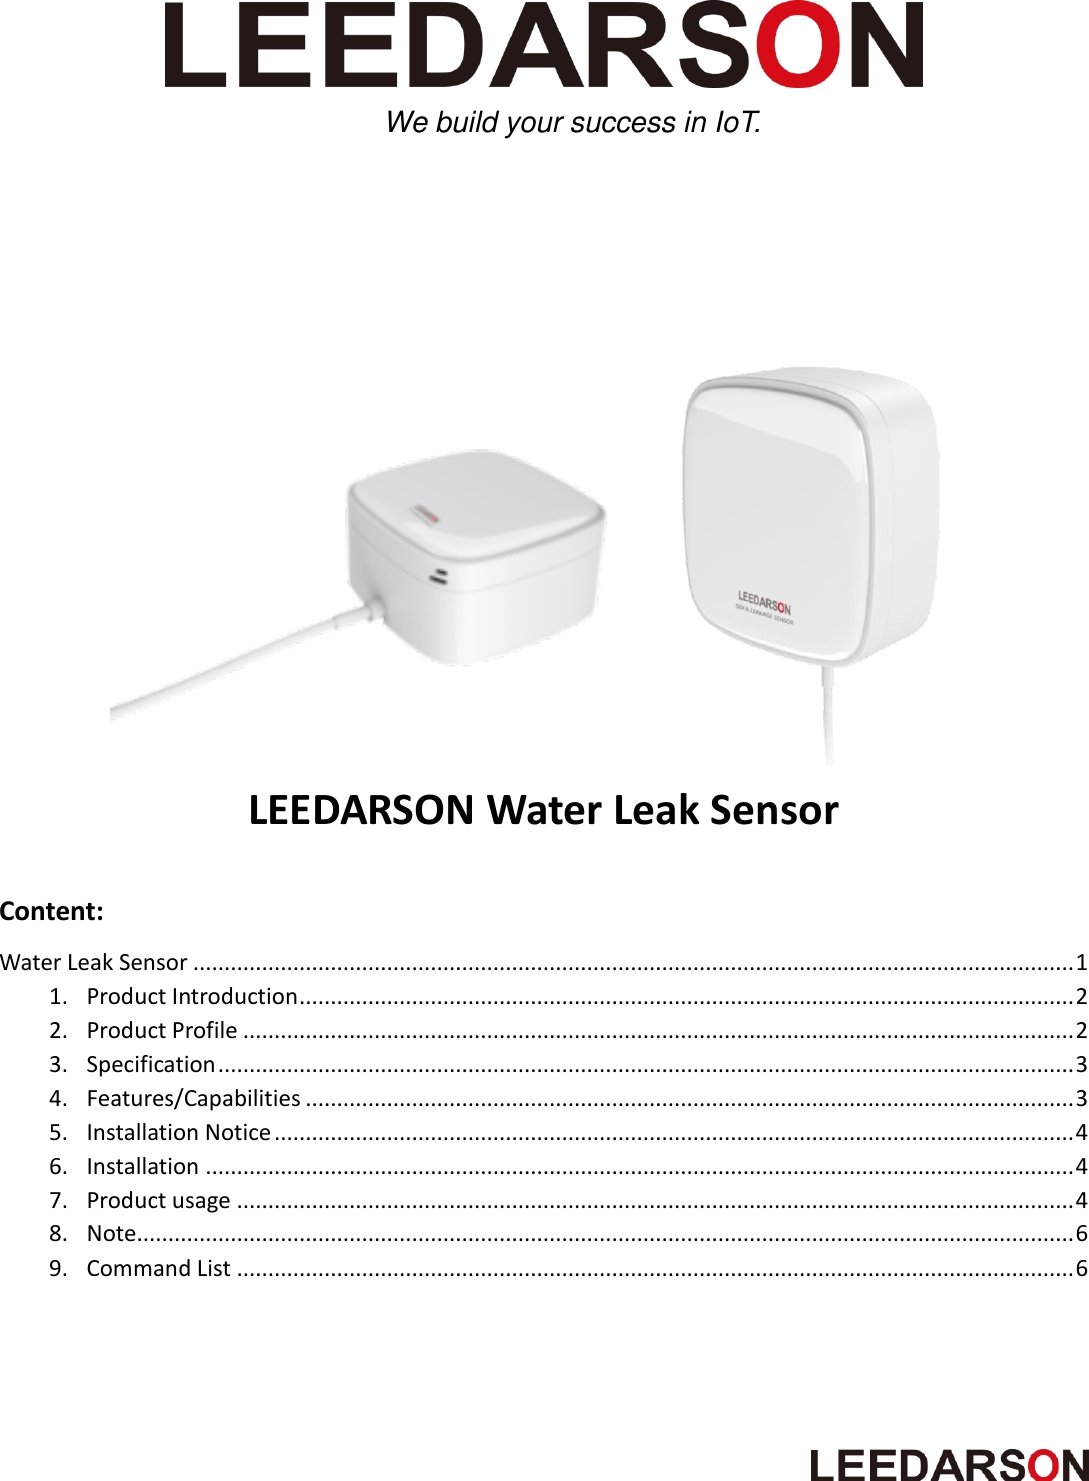                                 LEEDARSON Water Leak Sensor  Content: Water Leak Sensor ............................................................................................................................................. 1 1. Product Introduction ............................................................................................................................ 2 2. Product Profile ..................................................................................................................................... 2 3. Specification ......................................................................................................................................... 3 4. Features/Capabilities ........................................................................................................................... 3 5. Installation Notice ................................................................................................................................ 4 6. Installation ........................................................................................................................................... 4 7. Product usage ...................................................................................................................................... 4 8. Note ...................................................................................................................................................... 6 9. Command List ...................................................................................................................................... 6  We build your success in IoT.   